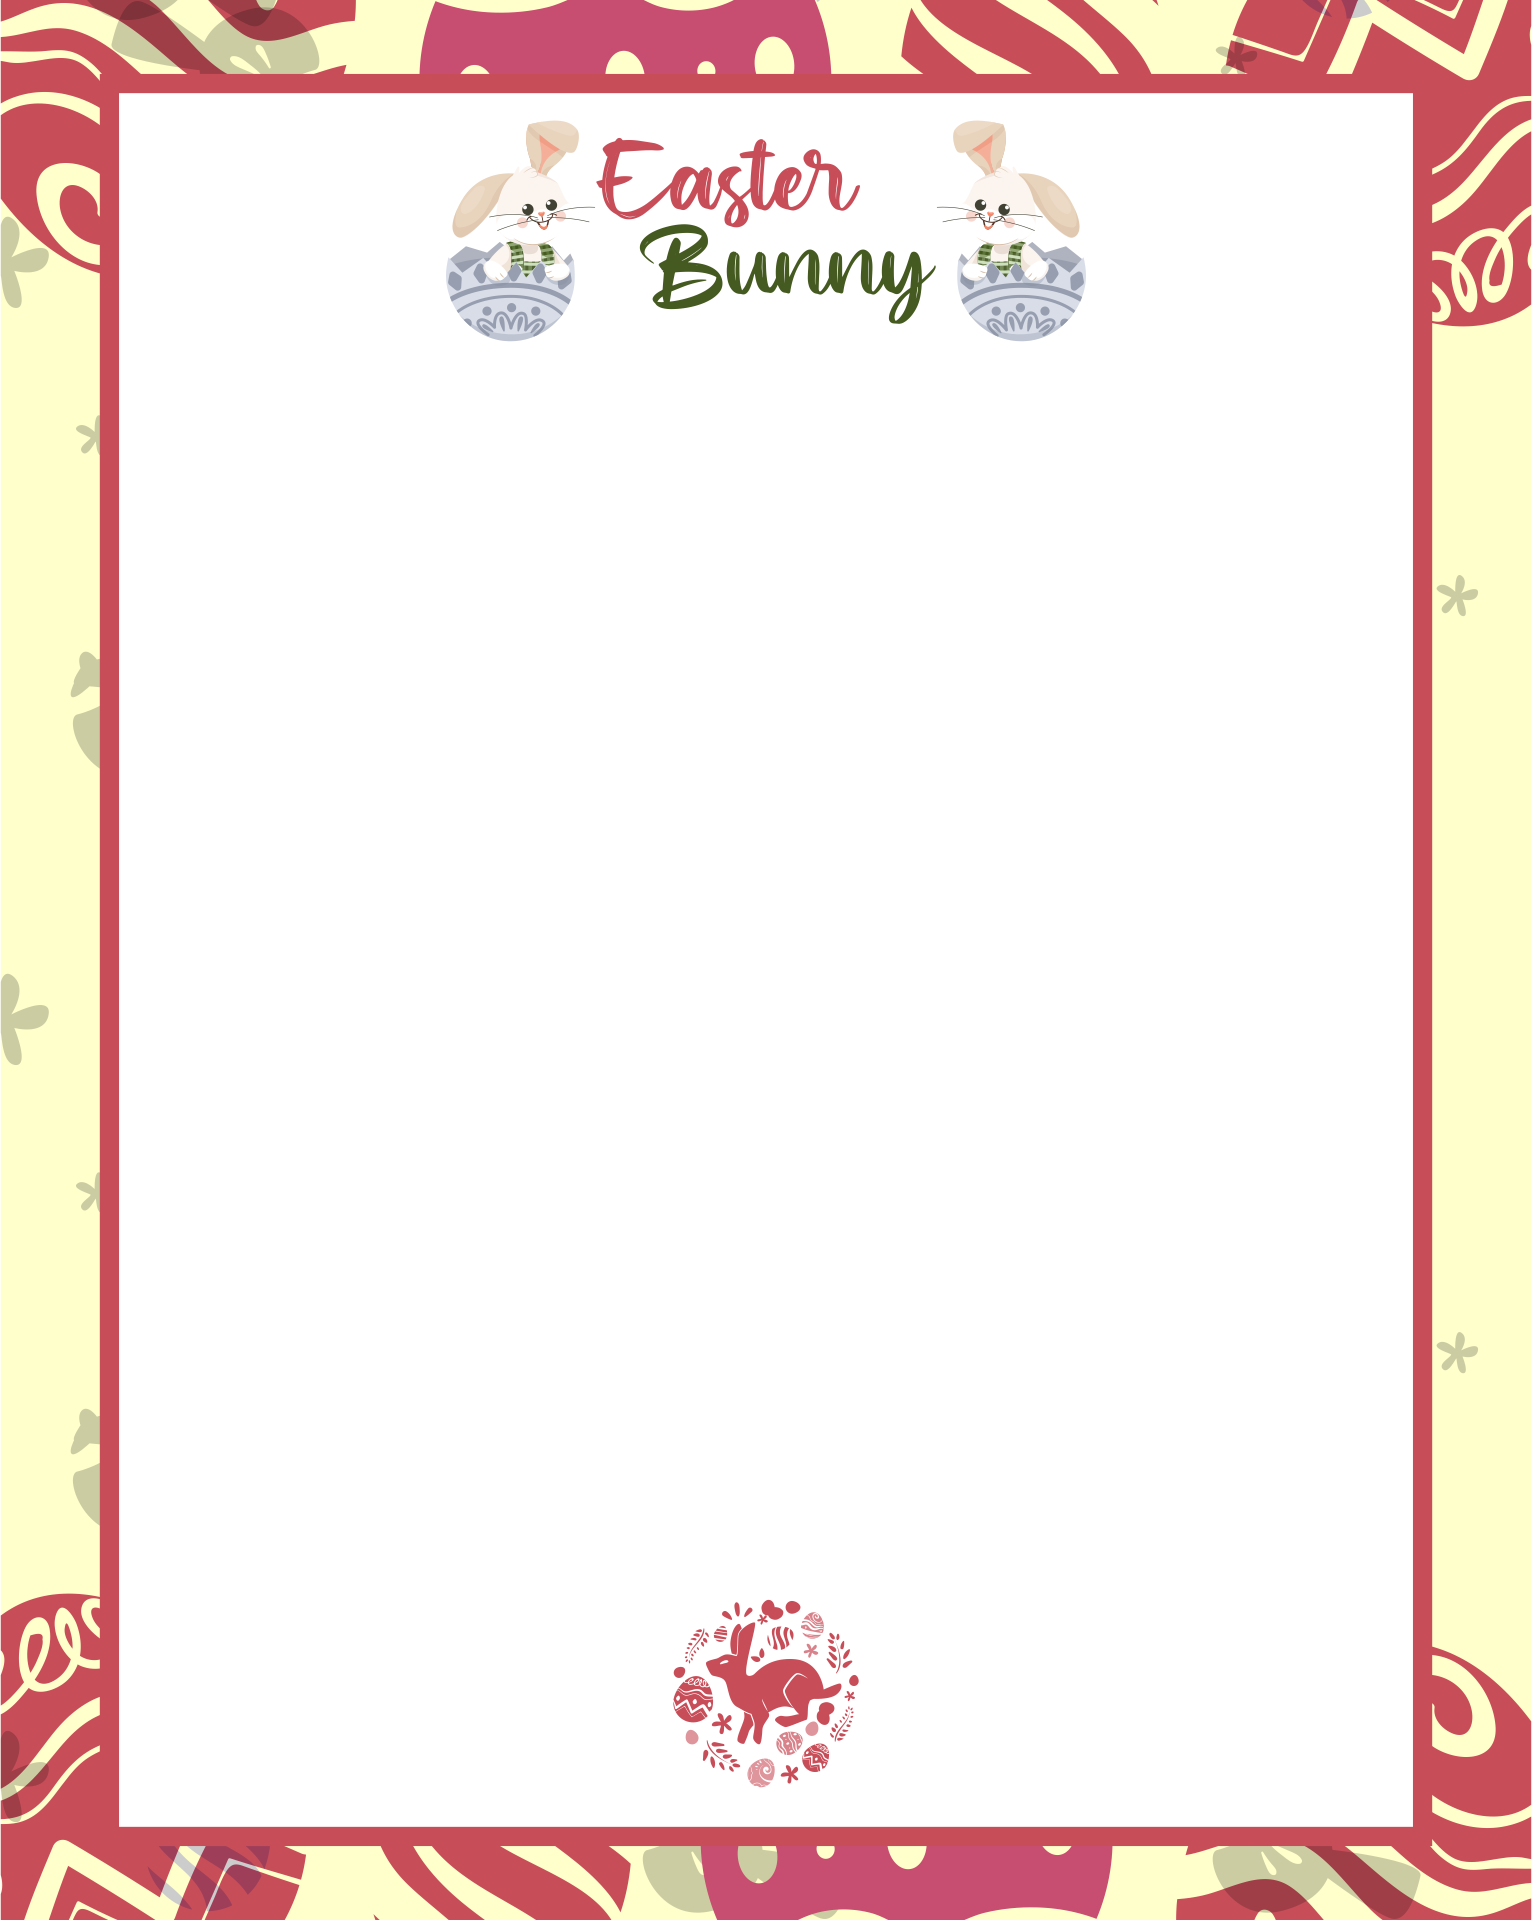 6-best-images-of-easter-bunny-free-printable-stationary-free